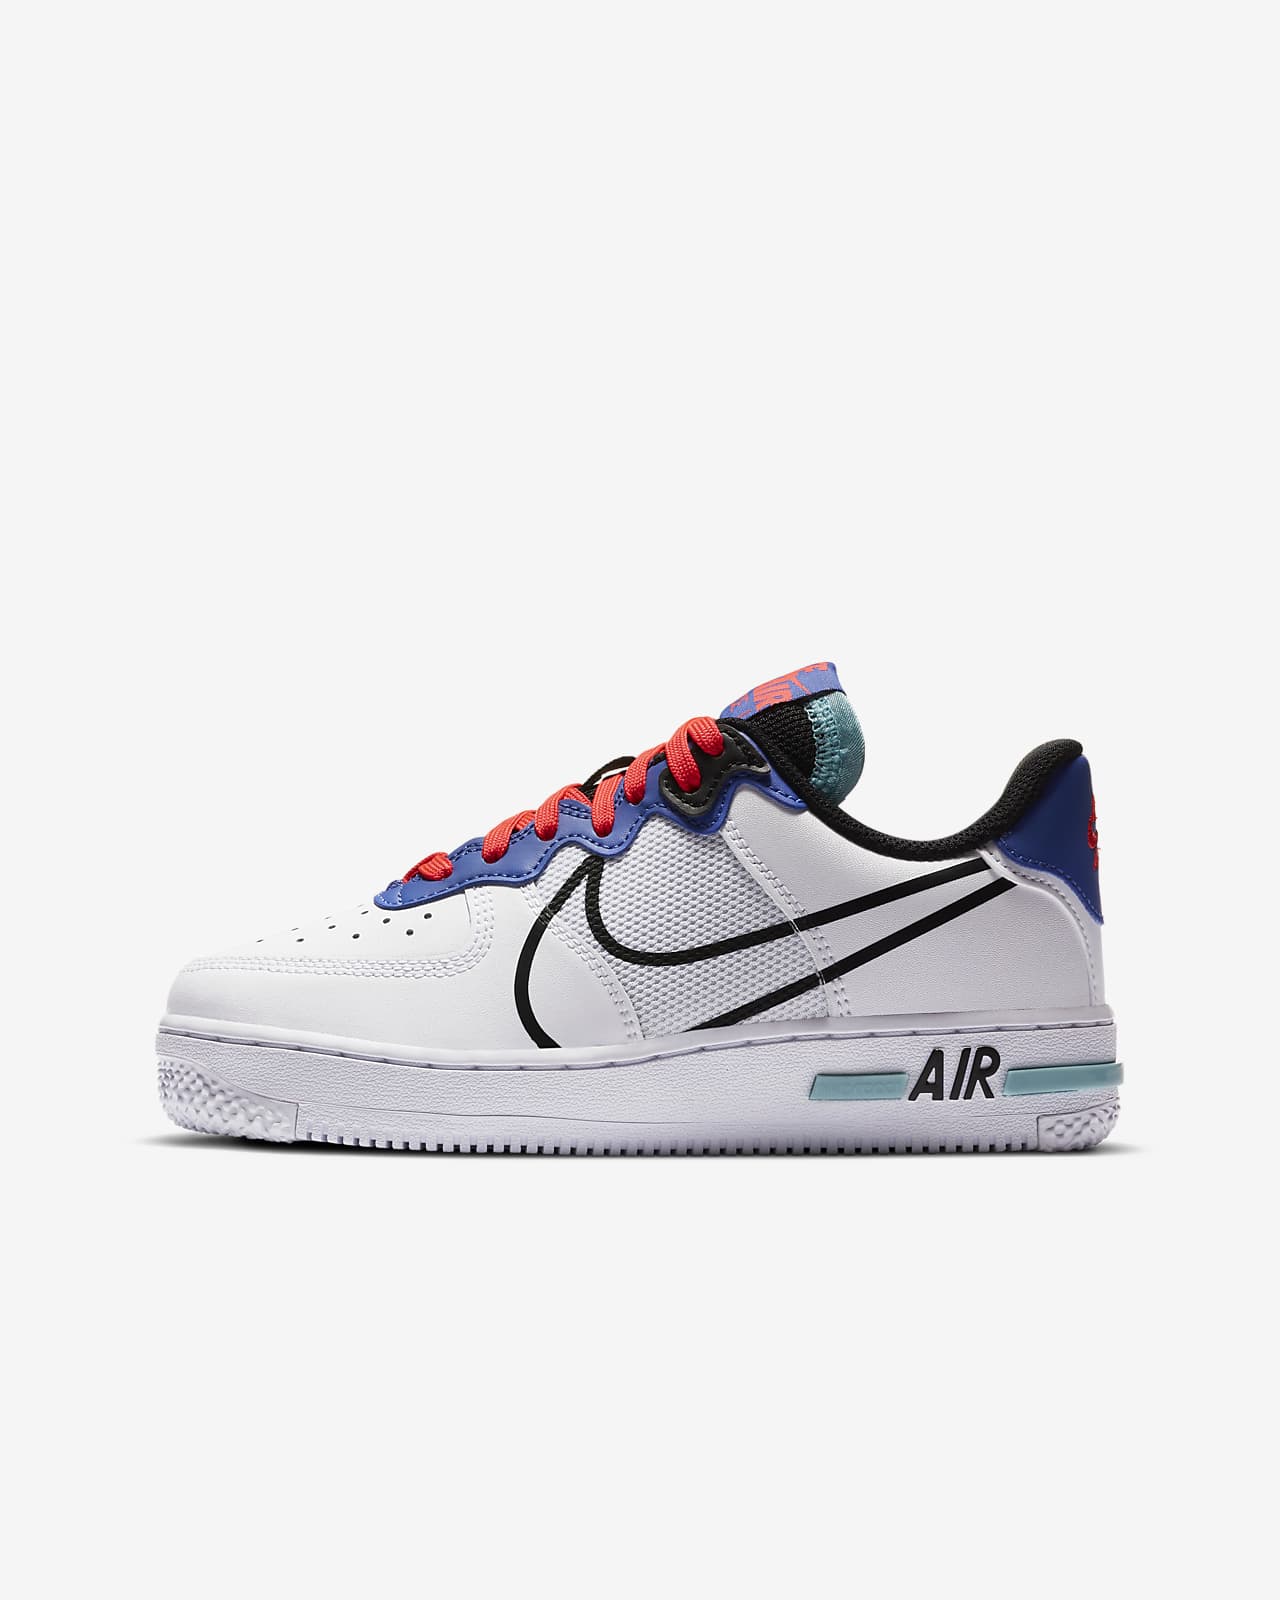 chaussure nike air force 1 enfant fille